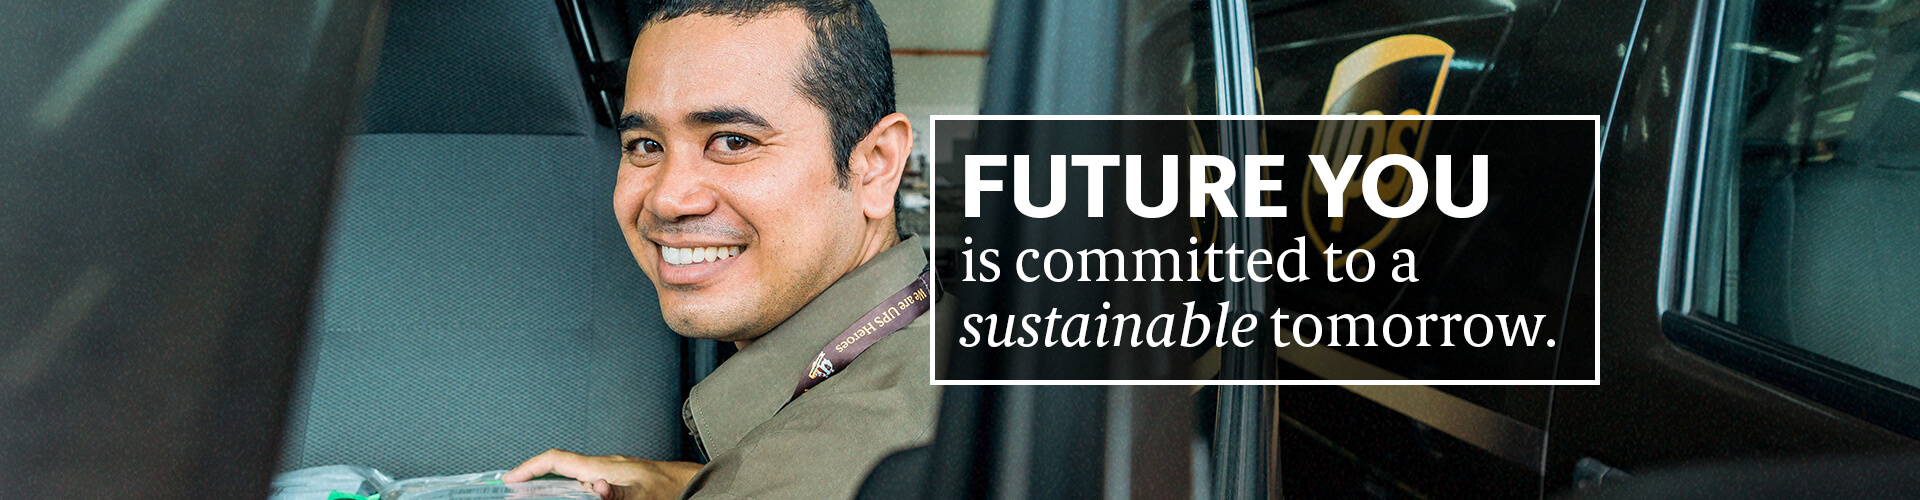 FUTURE YOU is committed to a sustainable tomorrow.